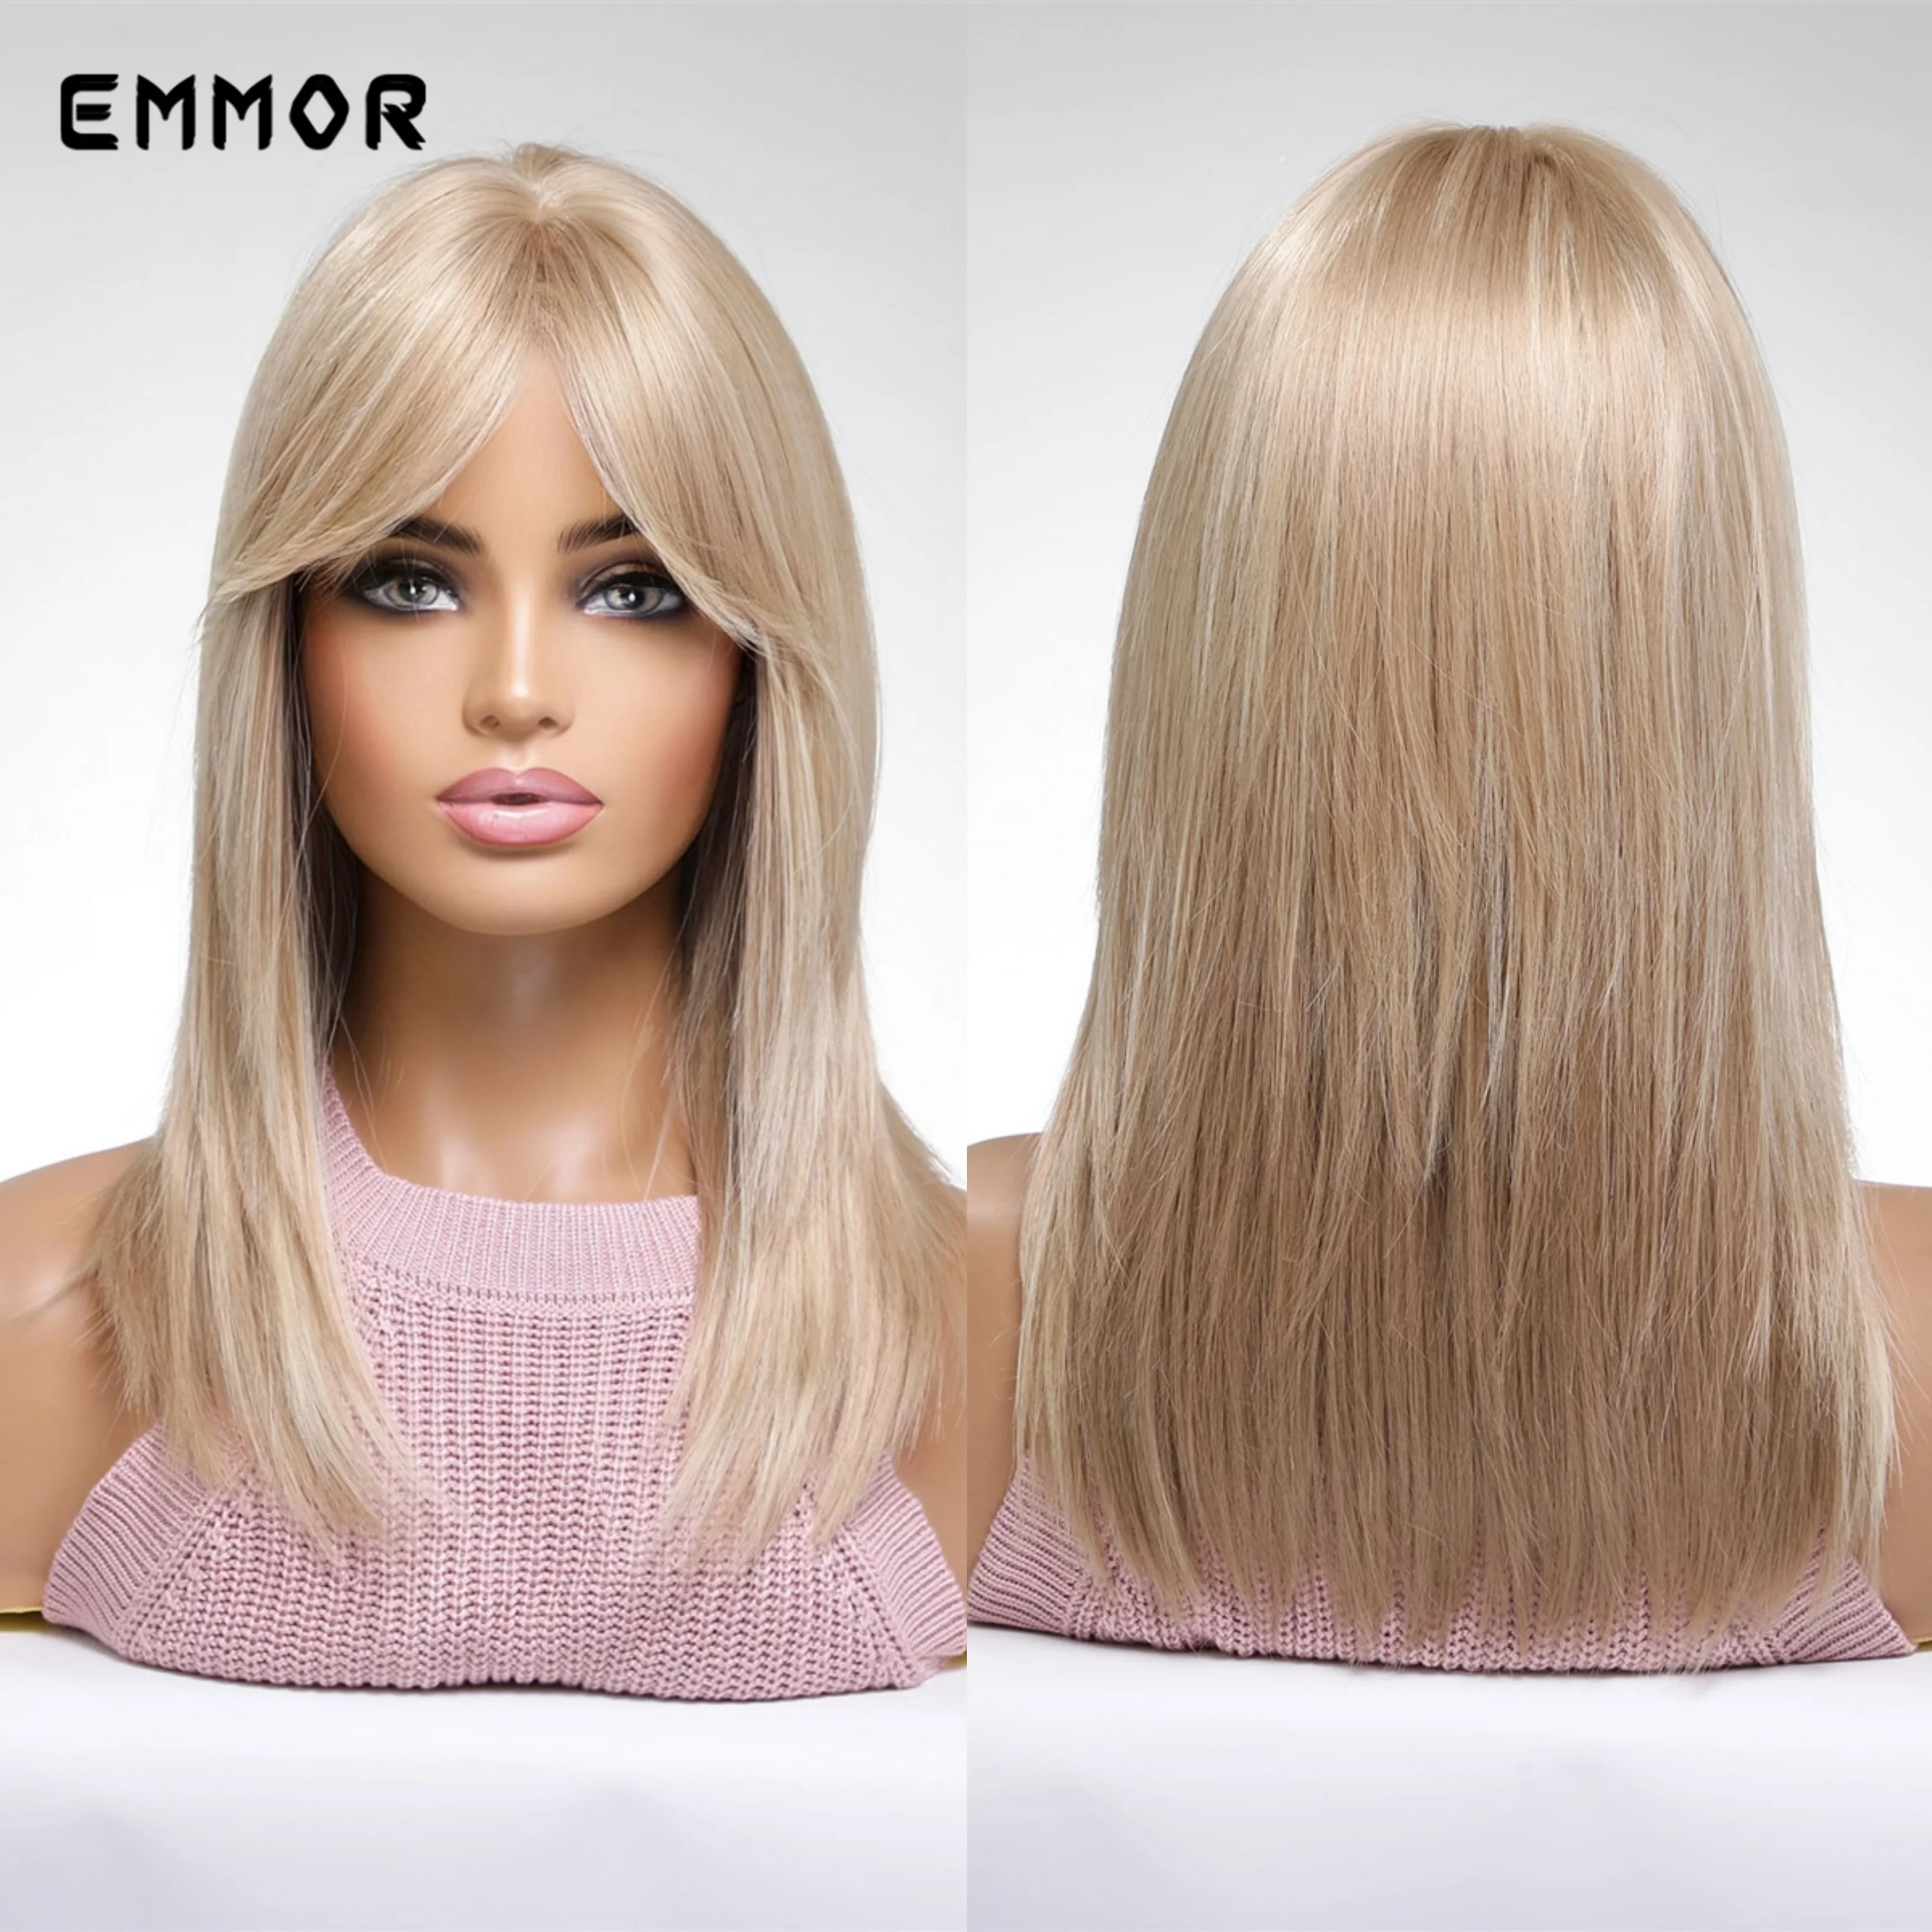 

Emmor Synthetic Ombre Black to Light Blonde Wig With Bangs Hair Wigs Cosplay Natural Heat Resistant Wigs for Women Daily Hair